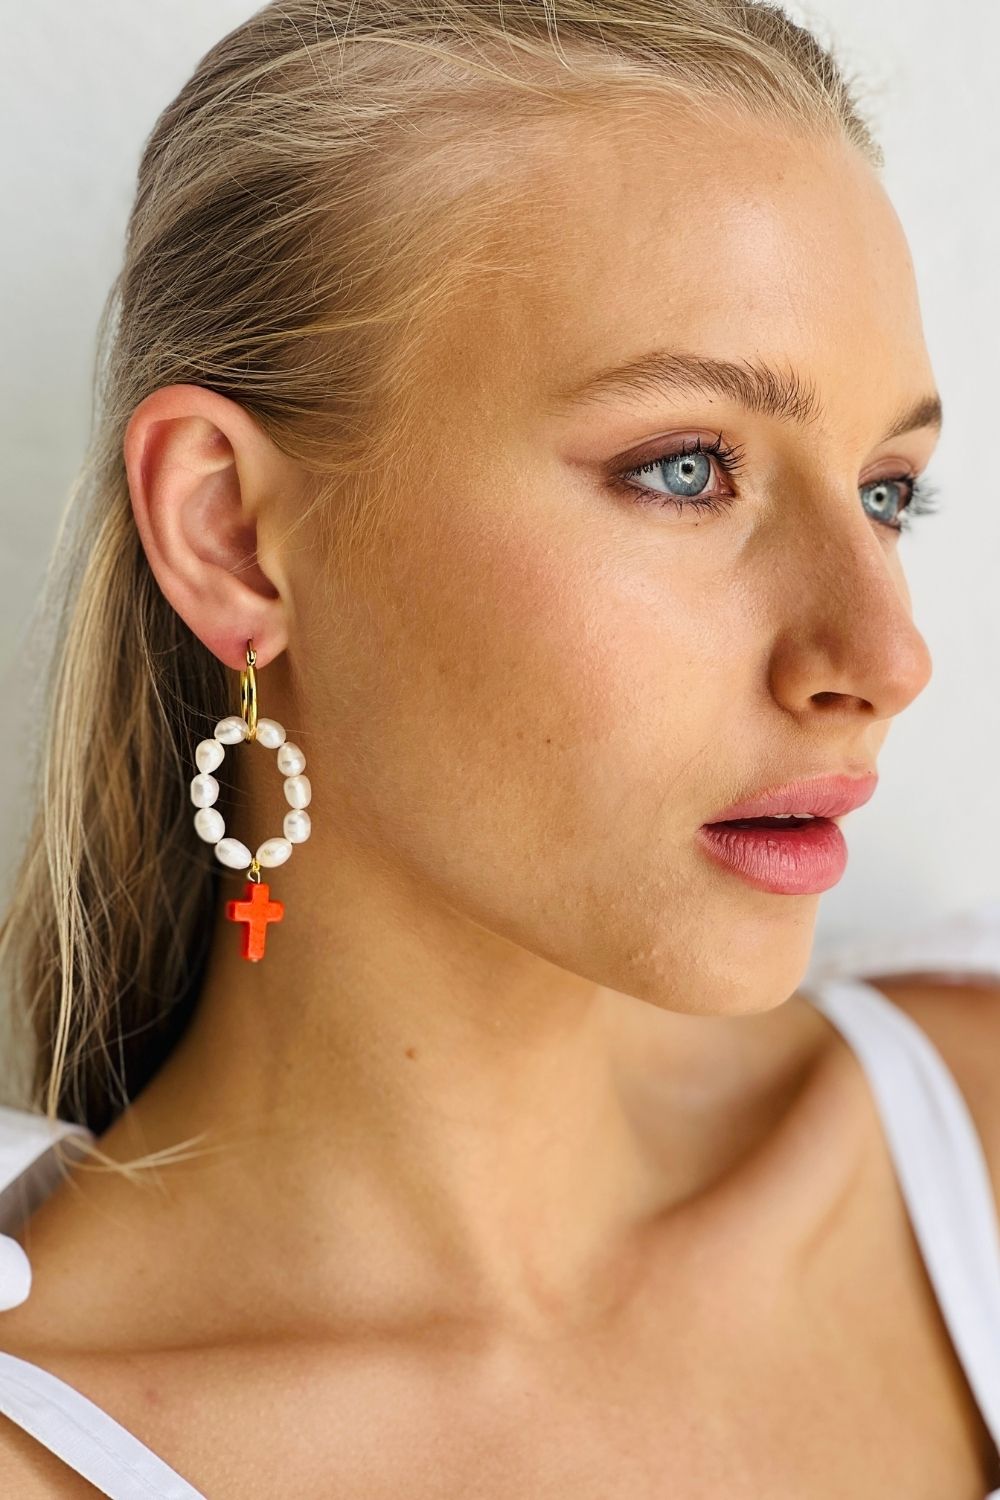 Drop pearl hoops with Red Coral Cross